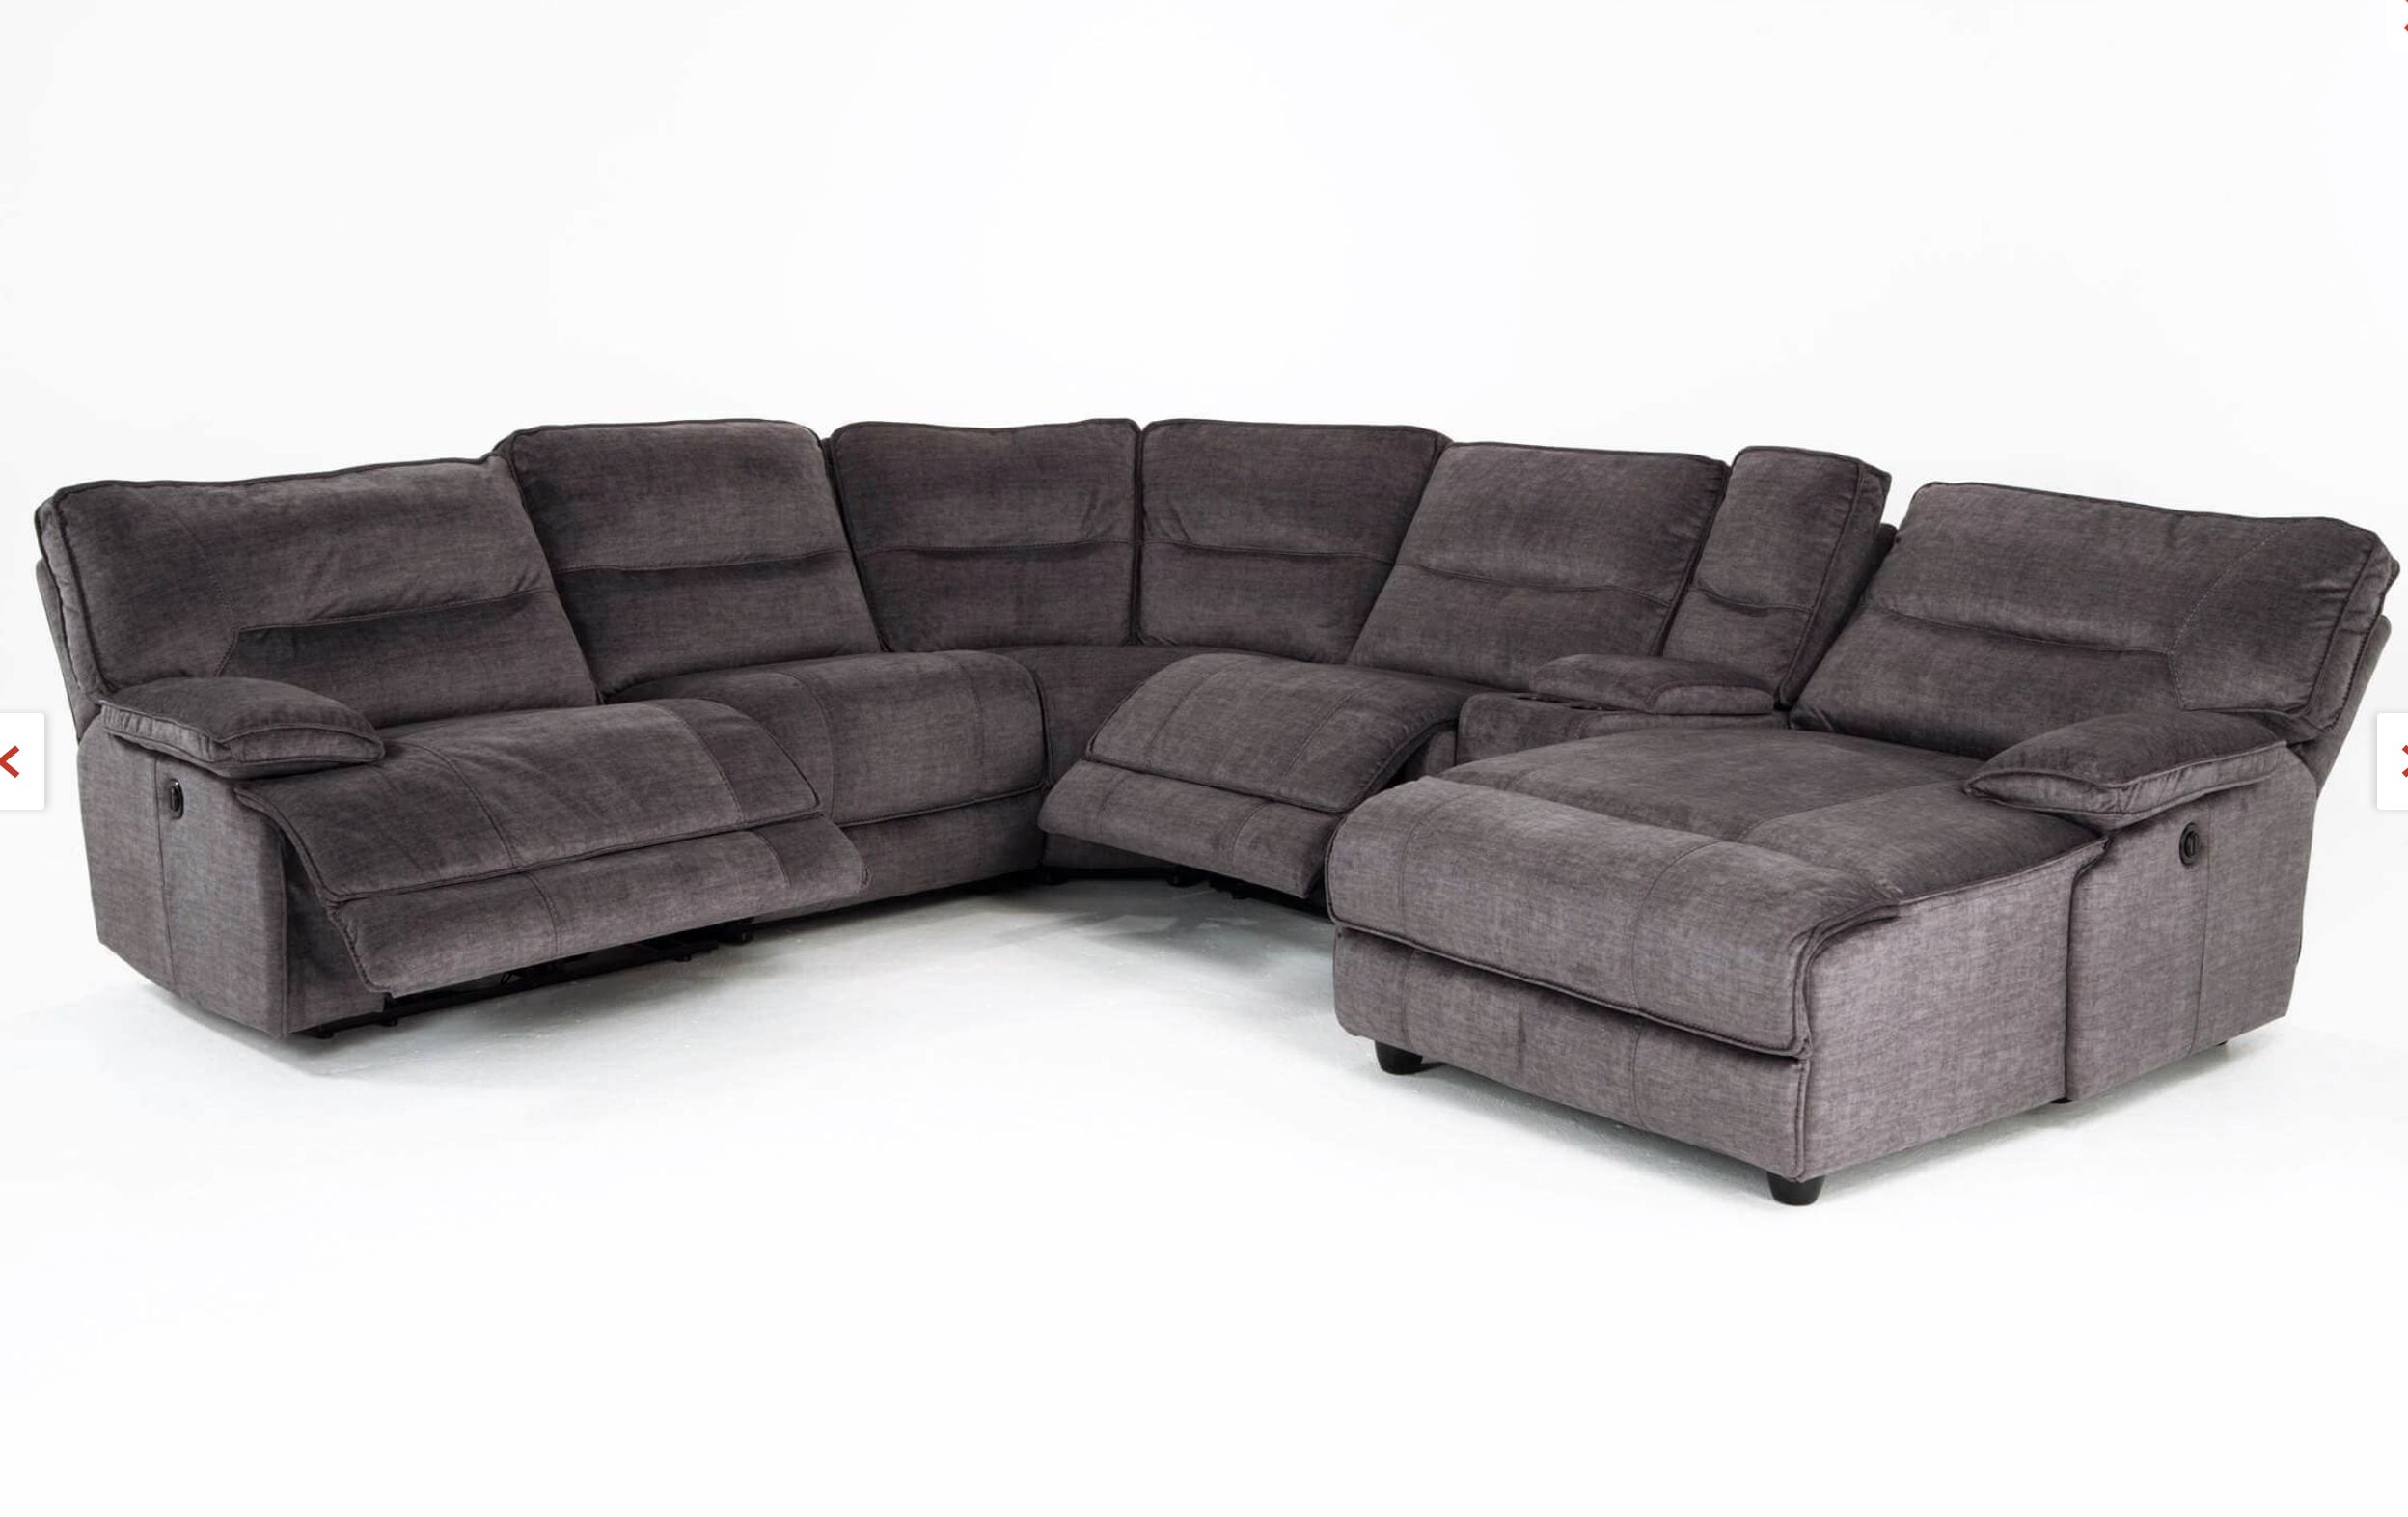 Pacifica Gray 6 Piece Power Reclining Left Arm Facing Intended For Pacifica Gray Power Reclining Sofas (View 5 of 15)